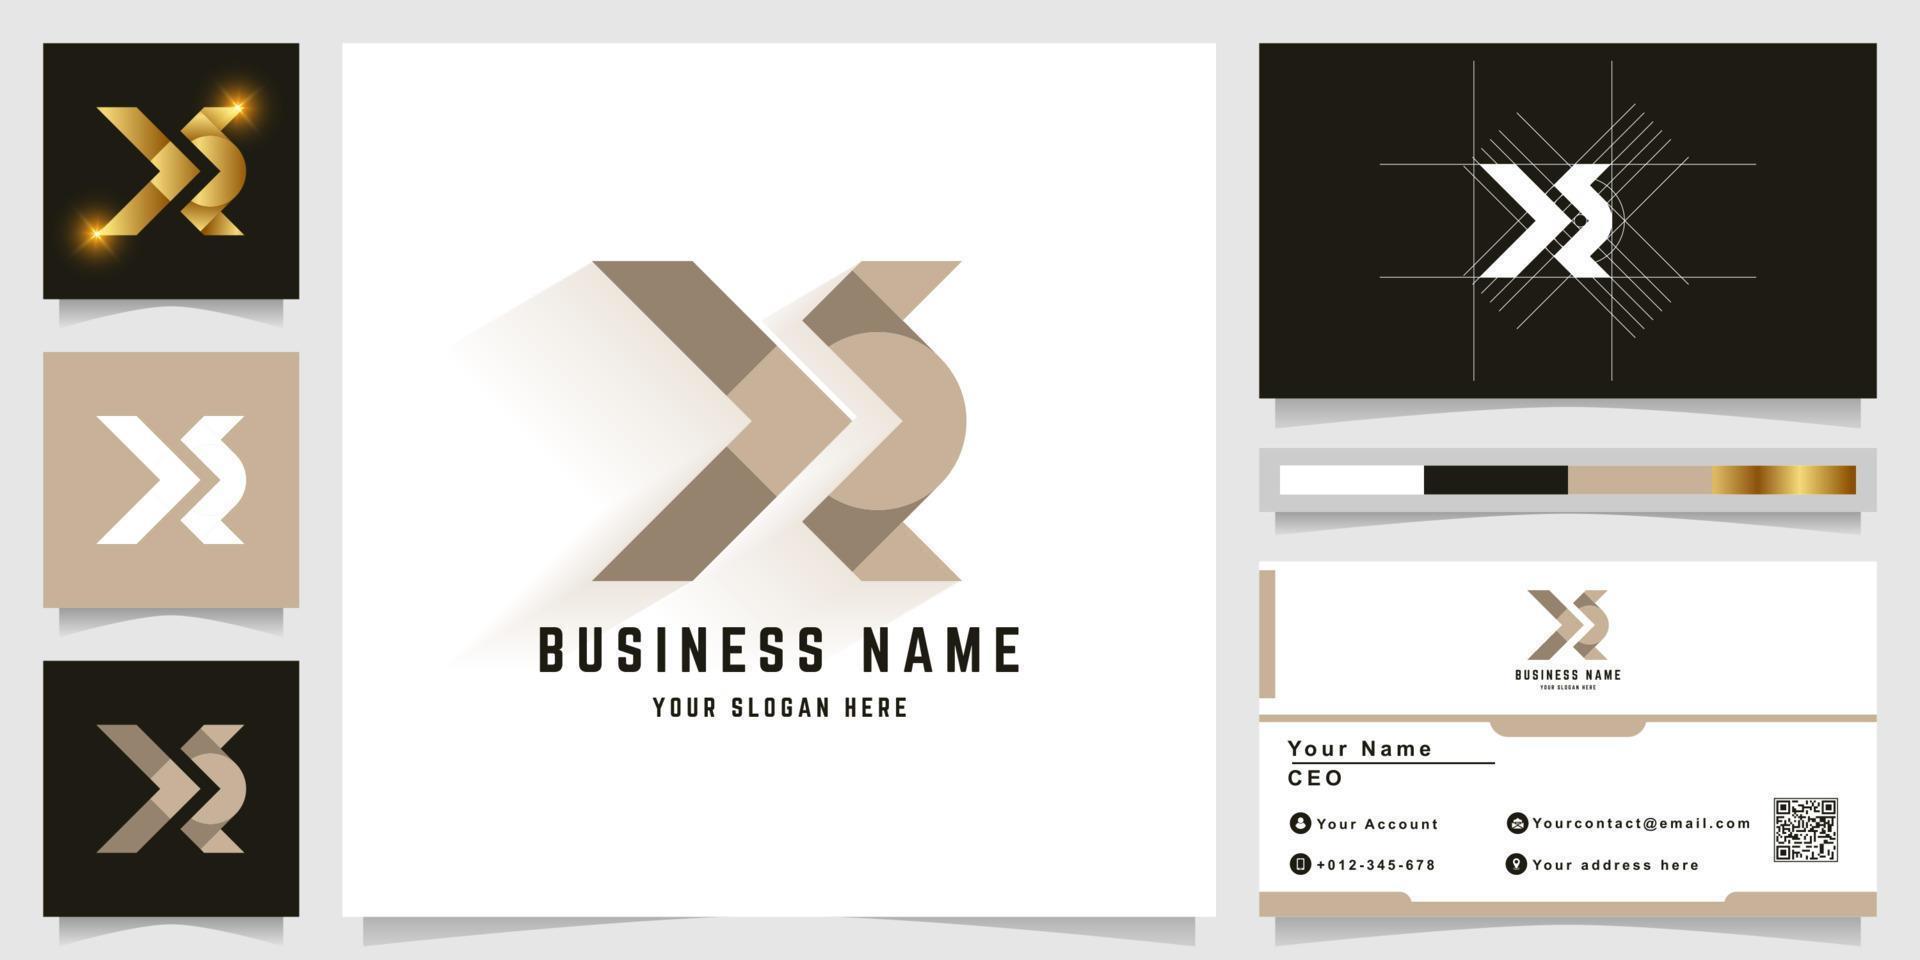 Letter X or XE monogram logo with business card design vector